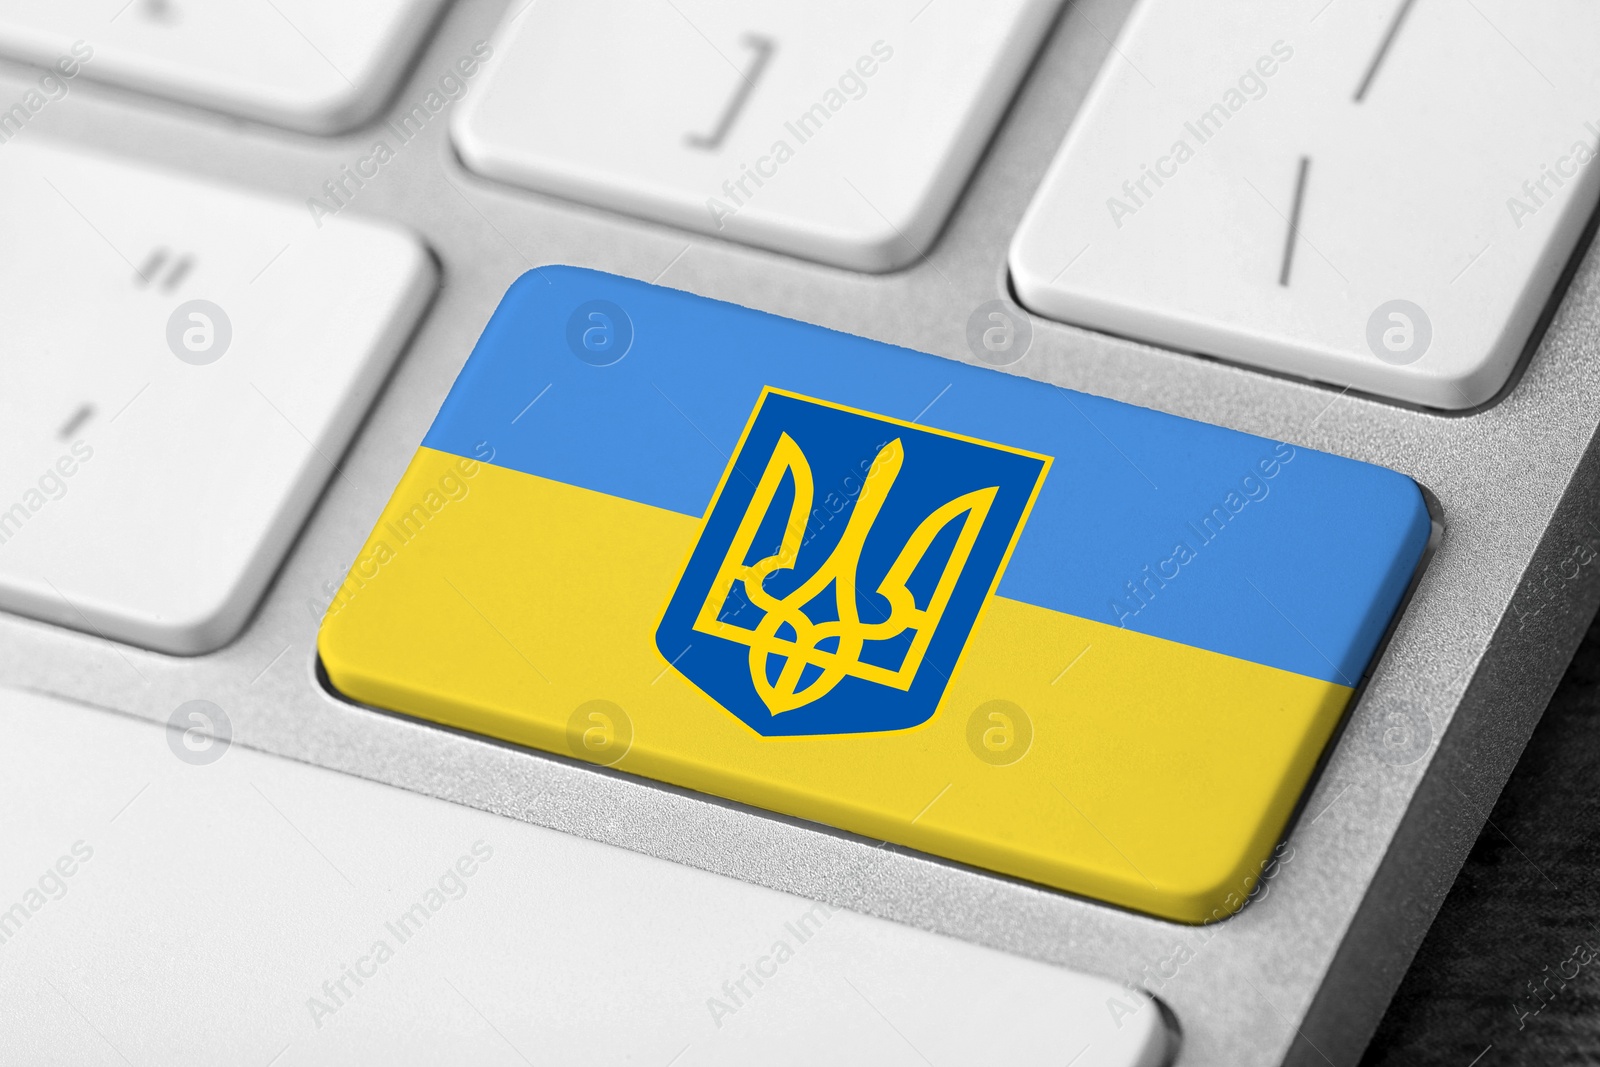 Image of Button in colors of Ukrainian flag with coat of arms on keyboard, closeup view